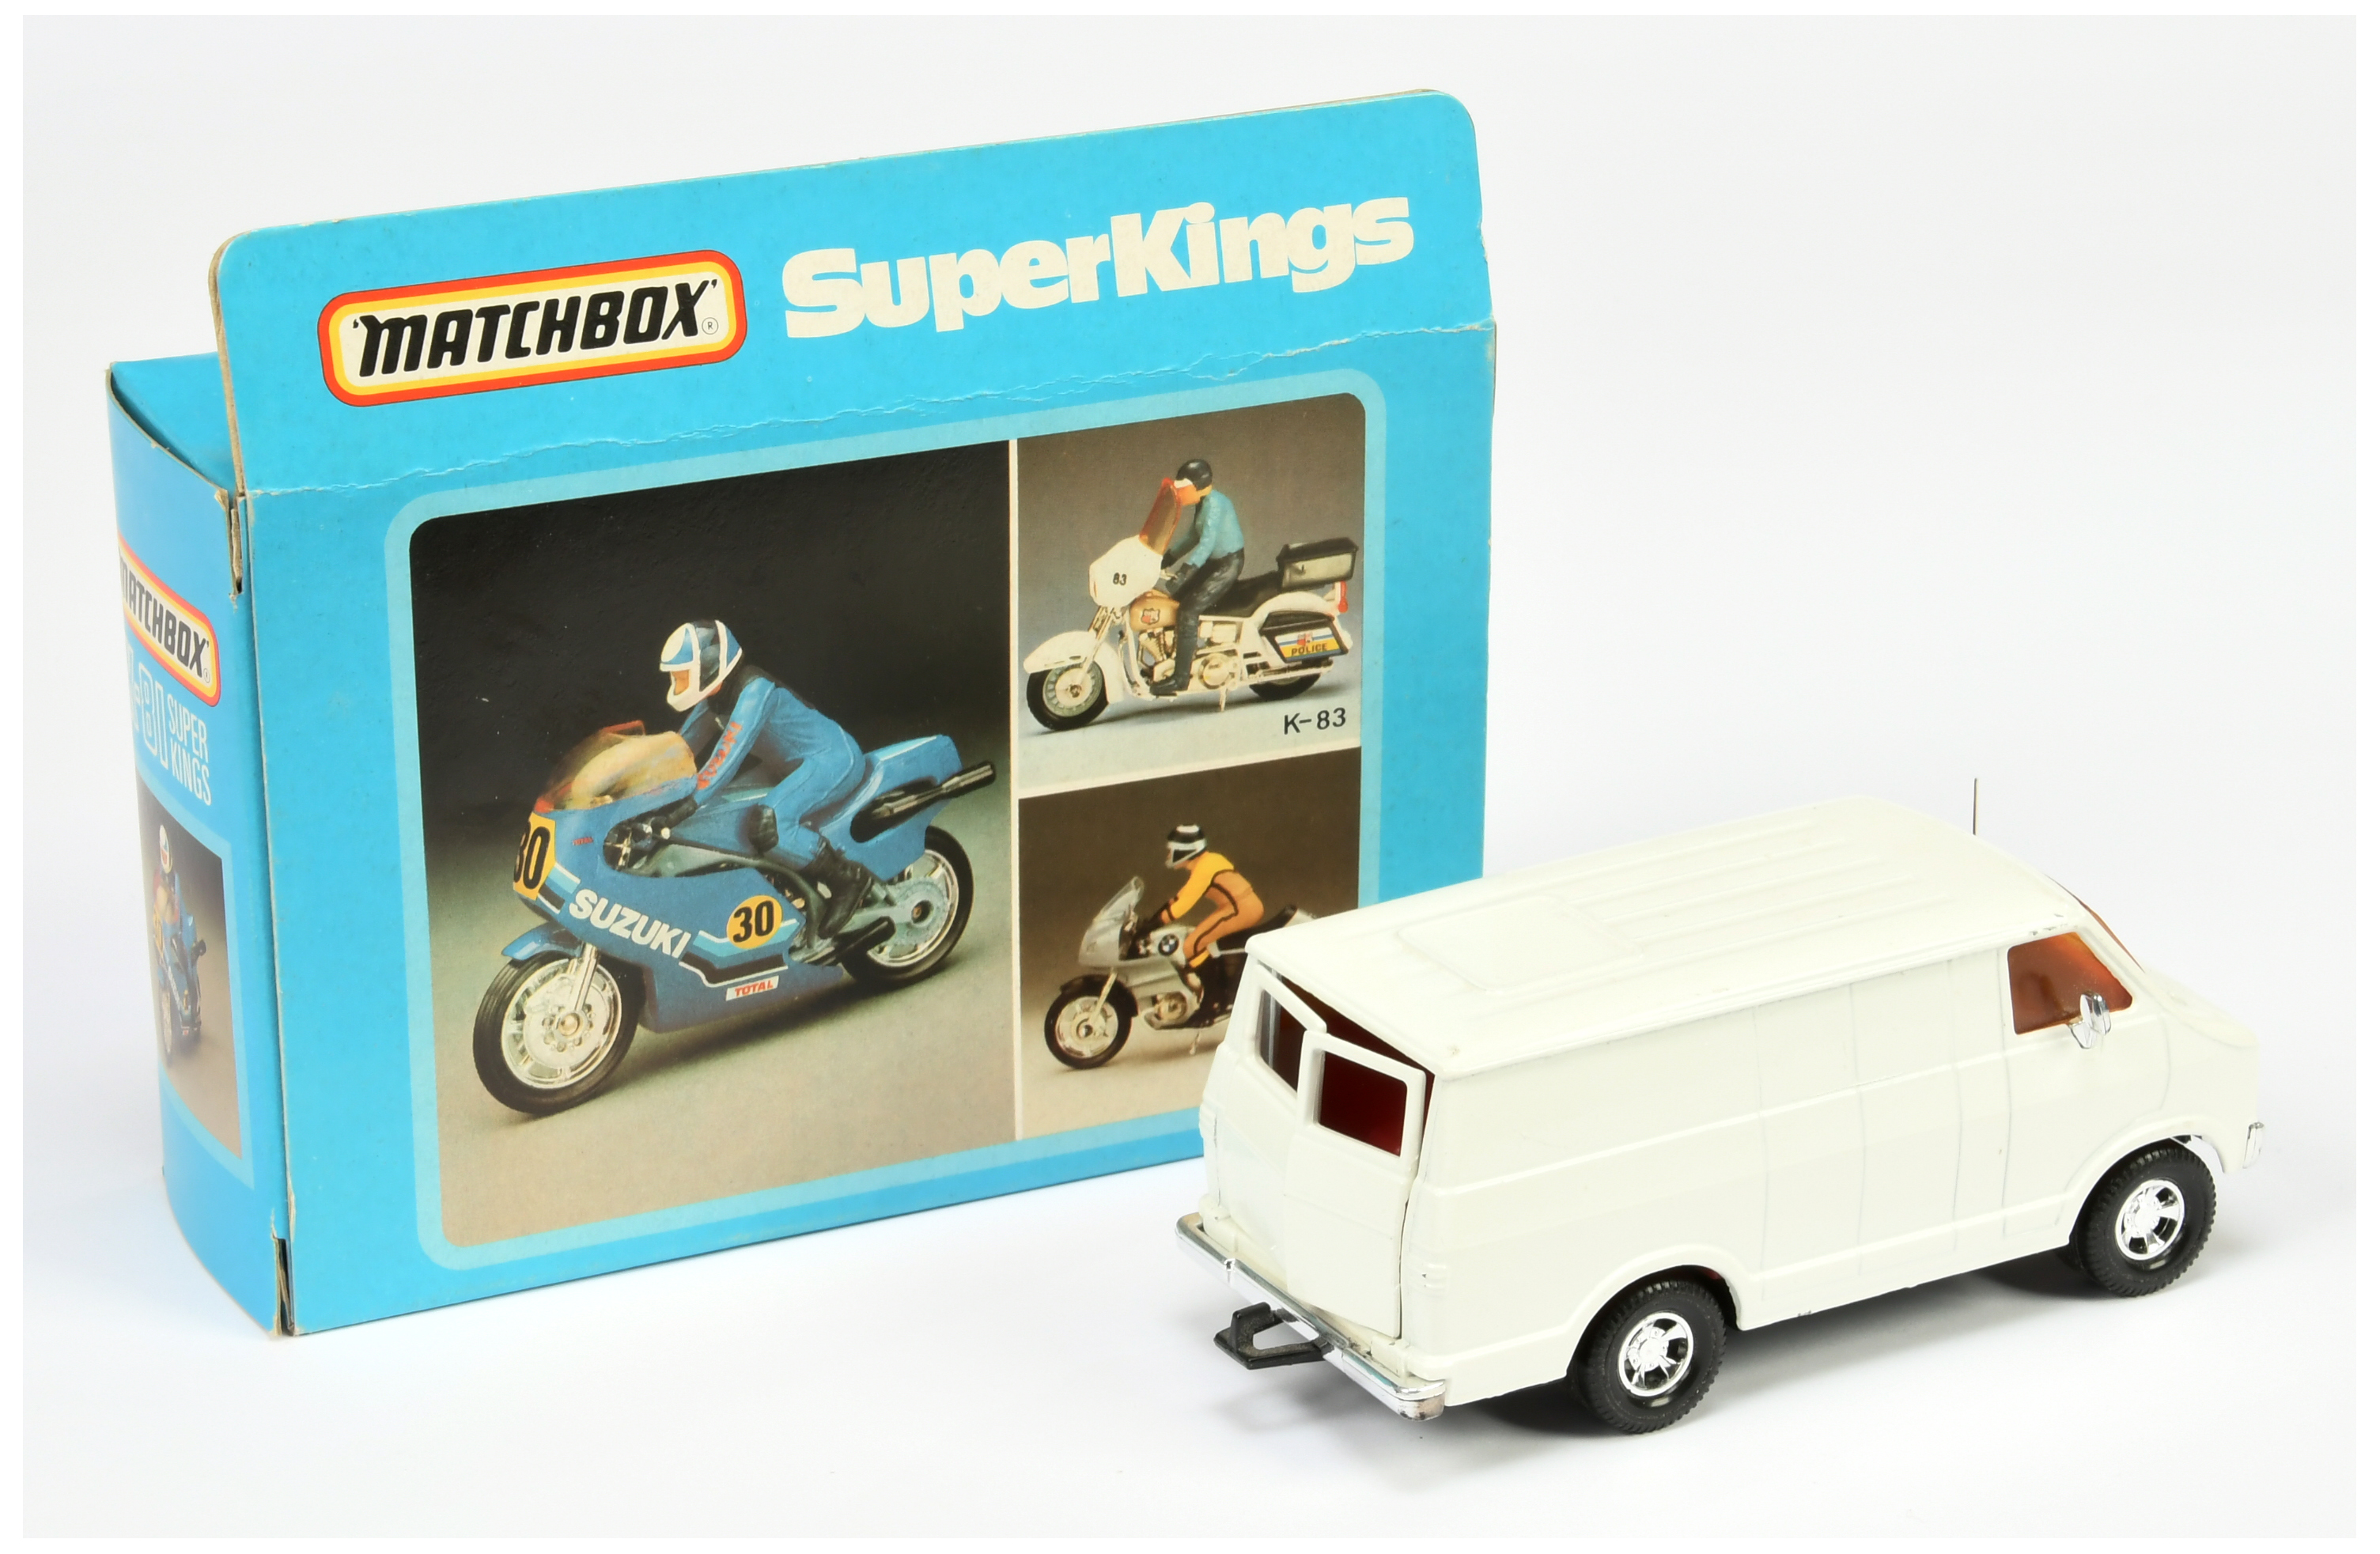 Matchbox Super Kings pair (1) K81 Suzuki Motorcycle - blue with racing number 30 tampo print Mint... - Image 2 of 2